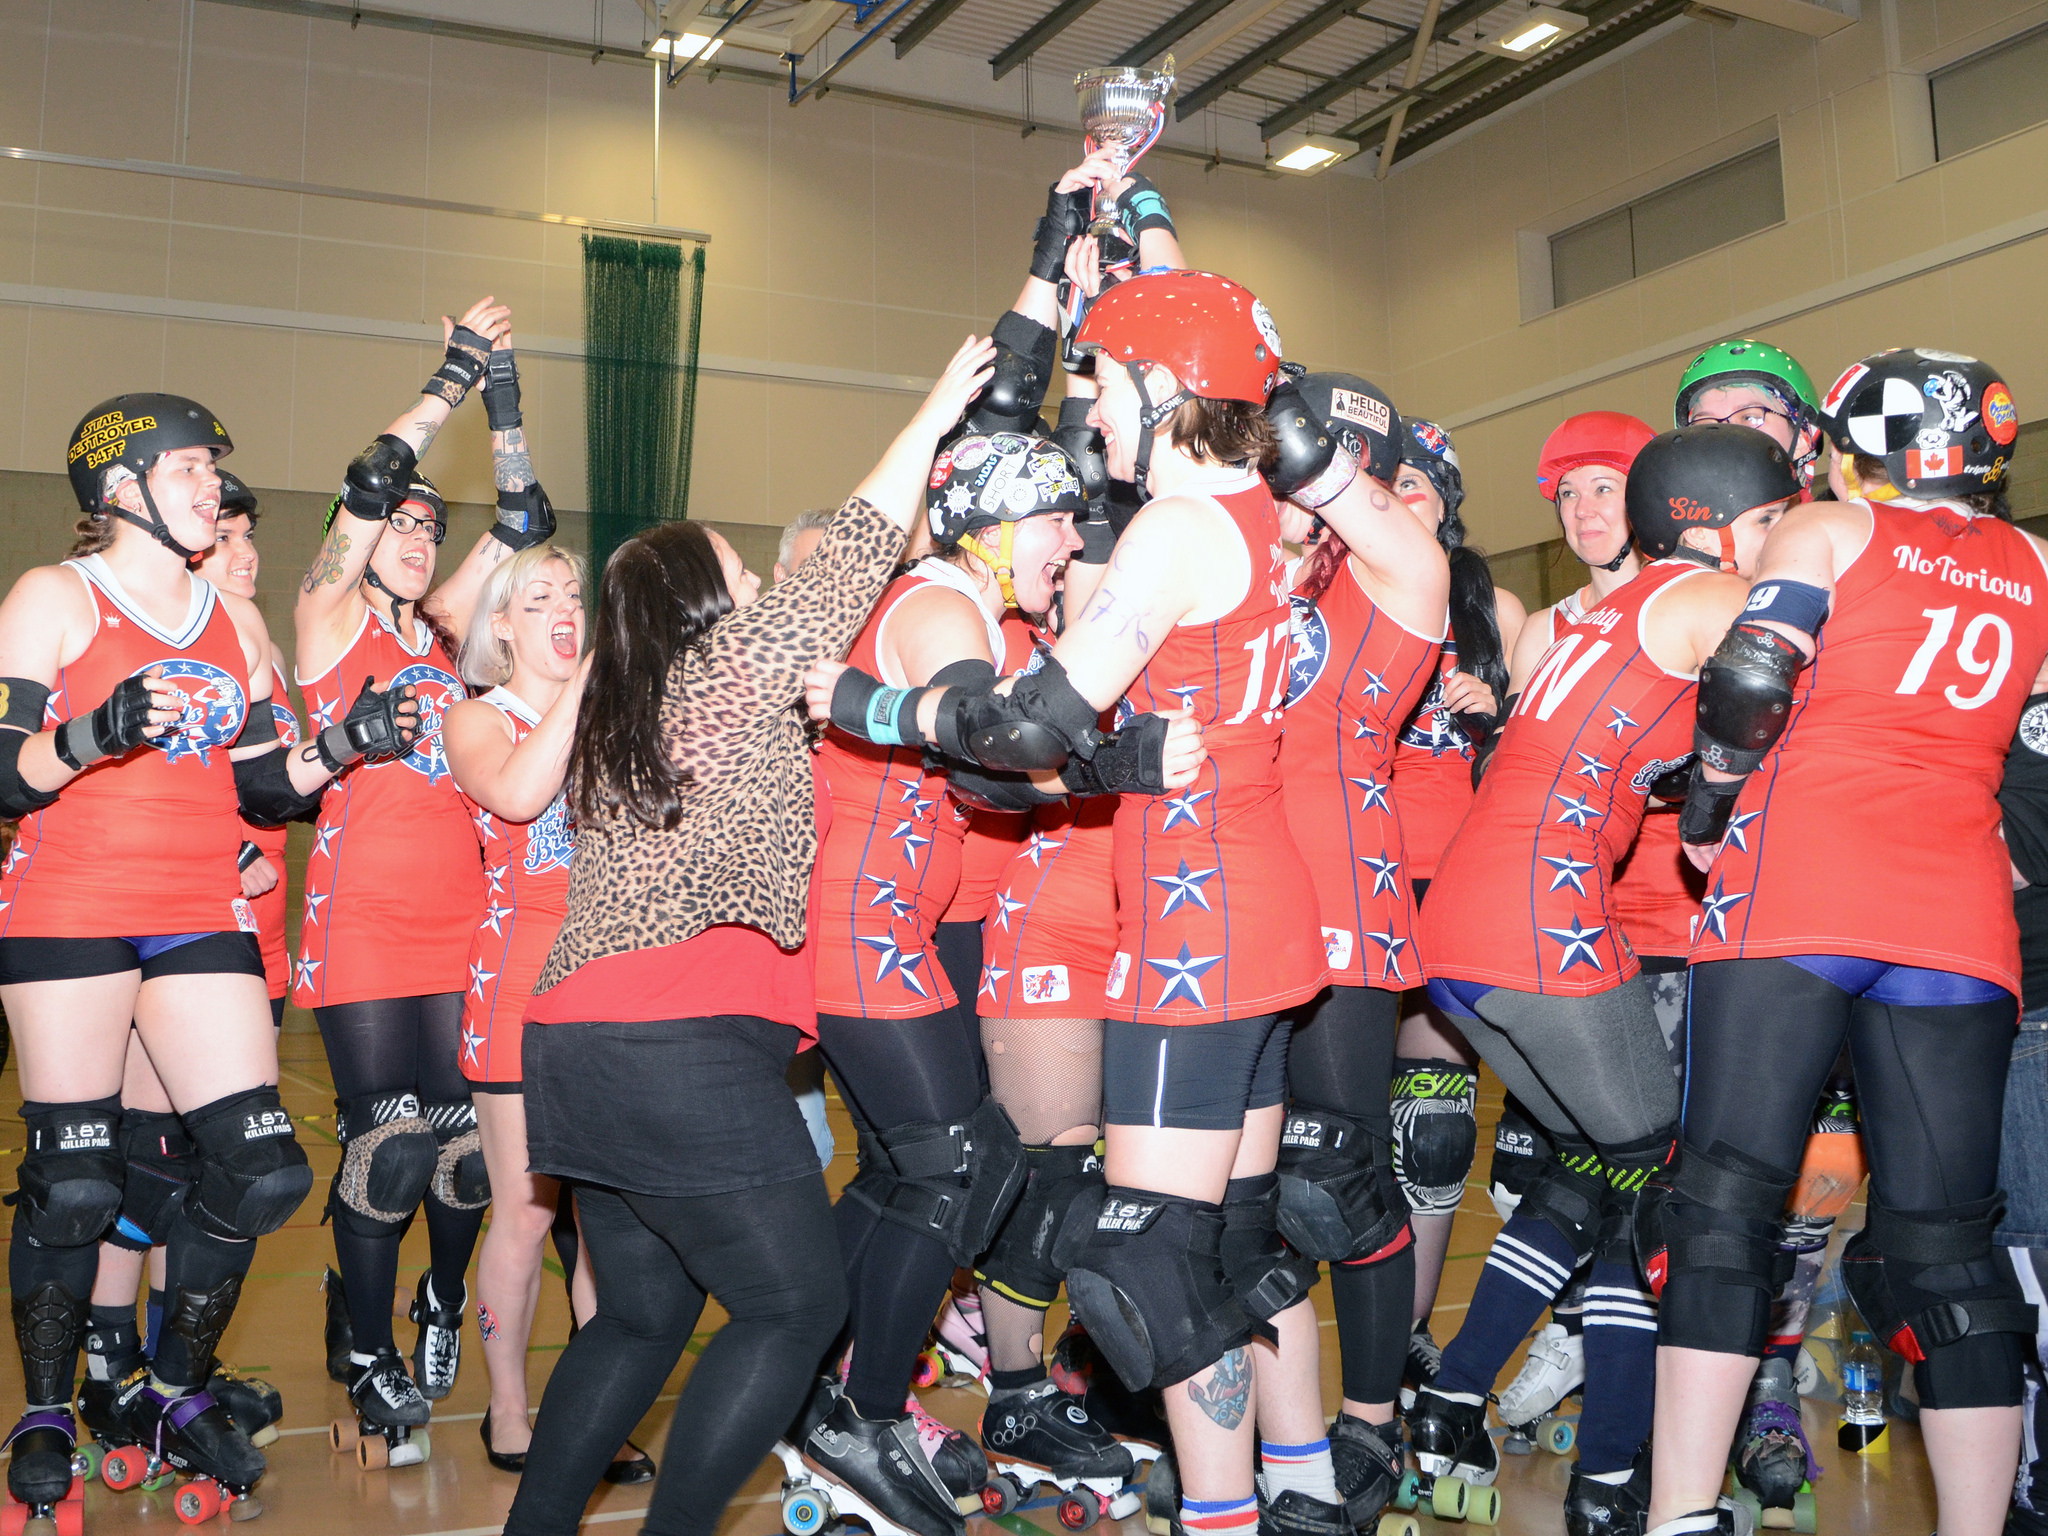 The End of the Roller Derby Season